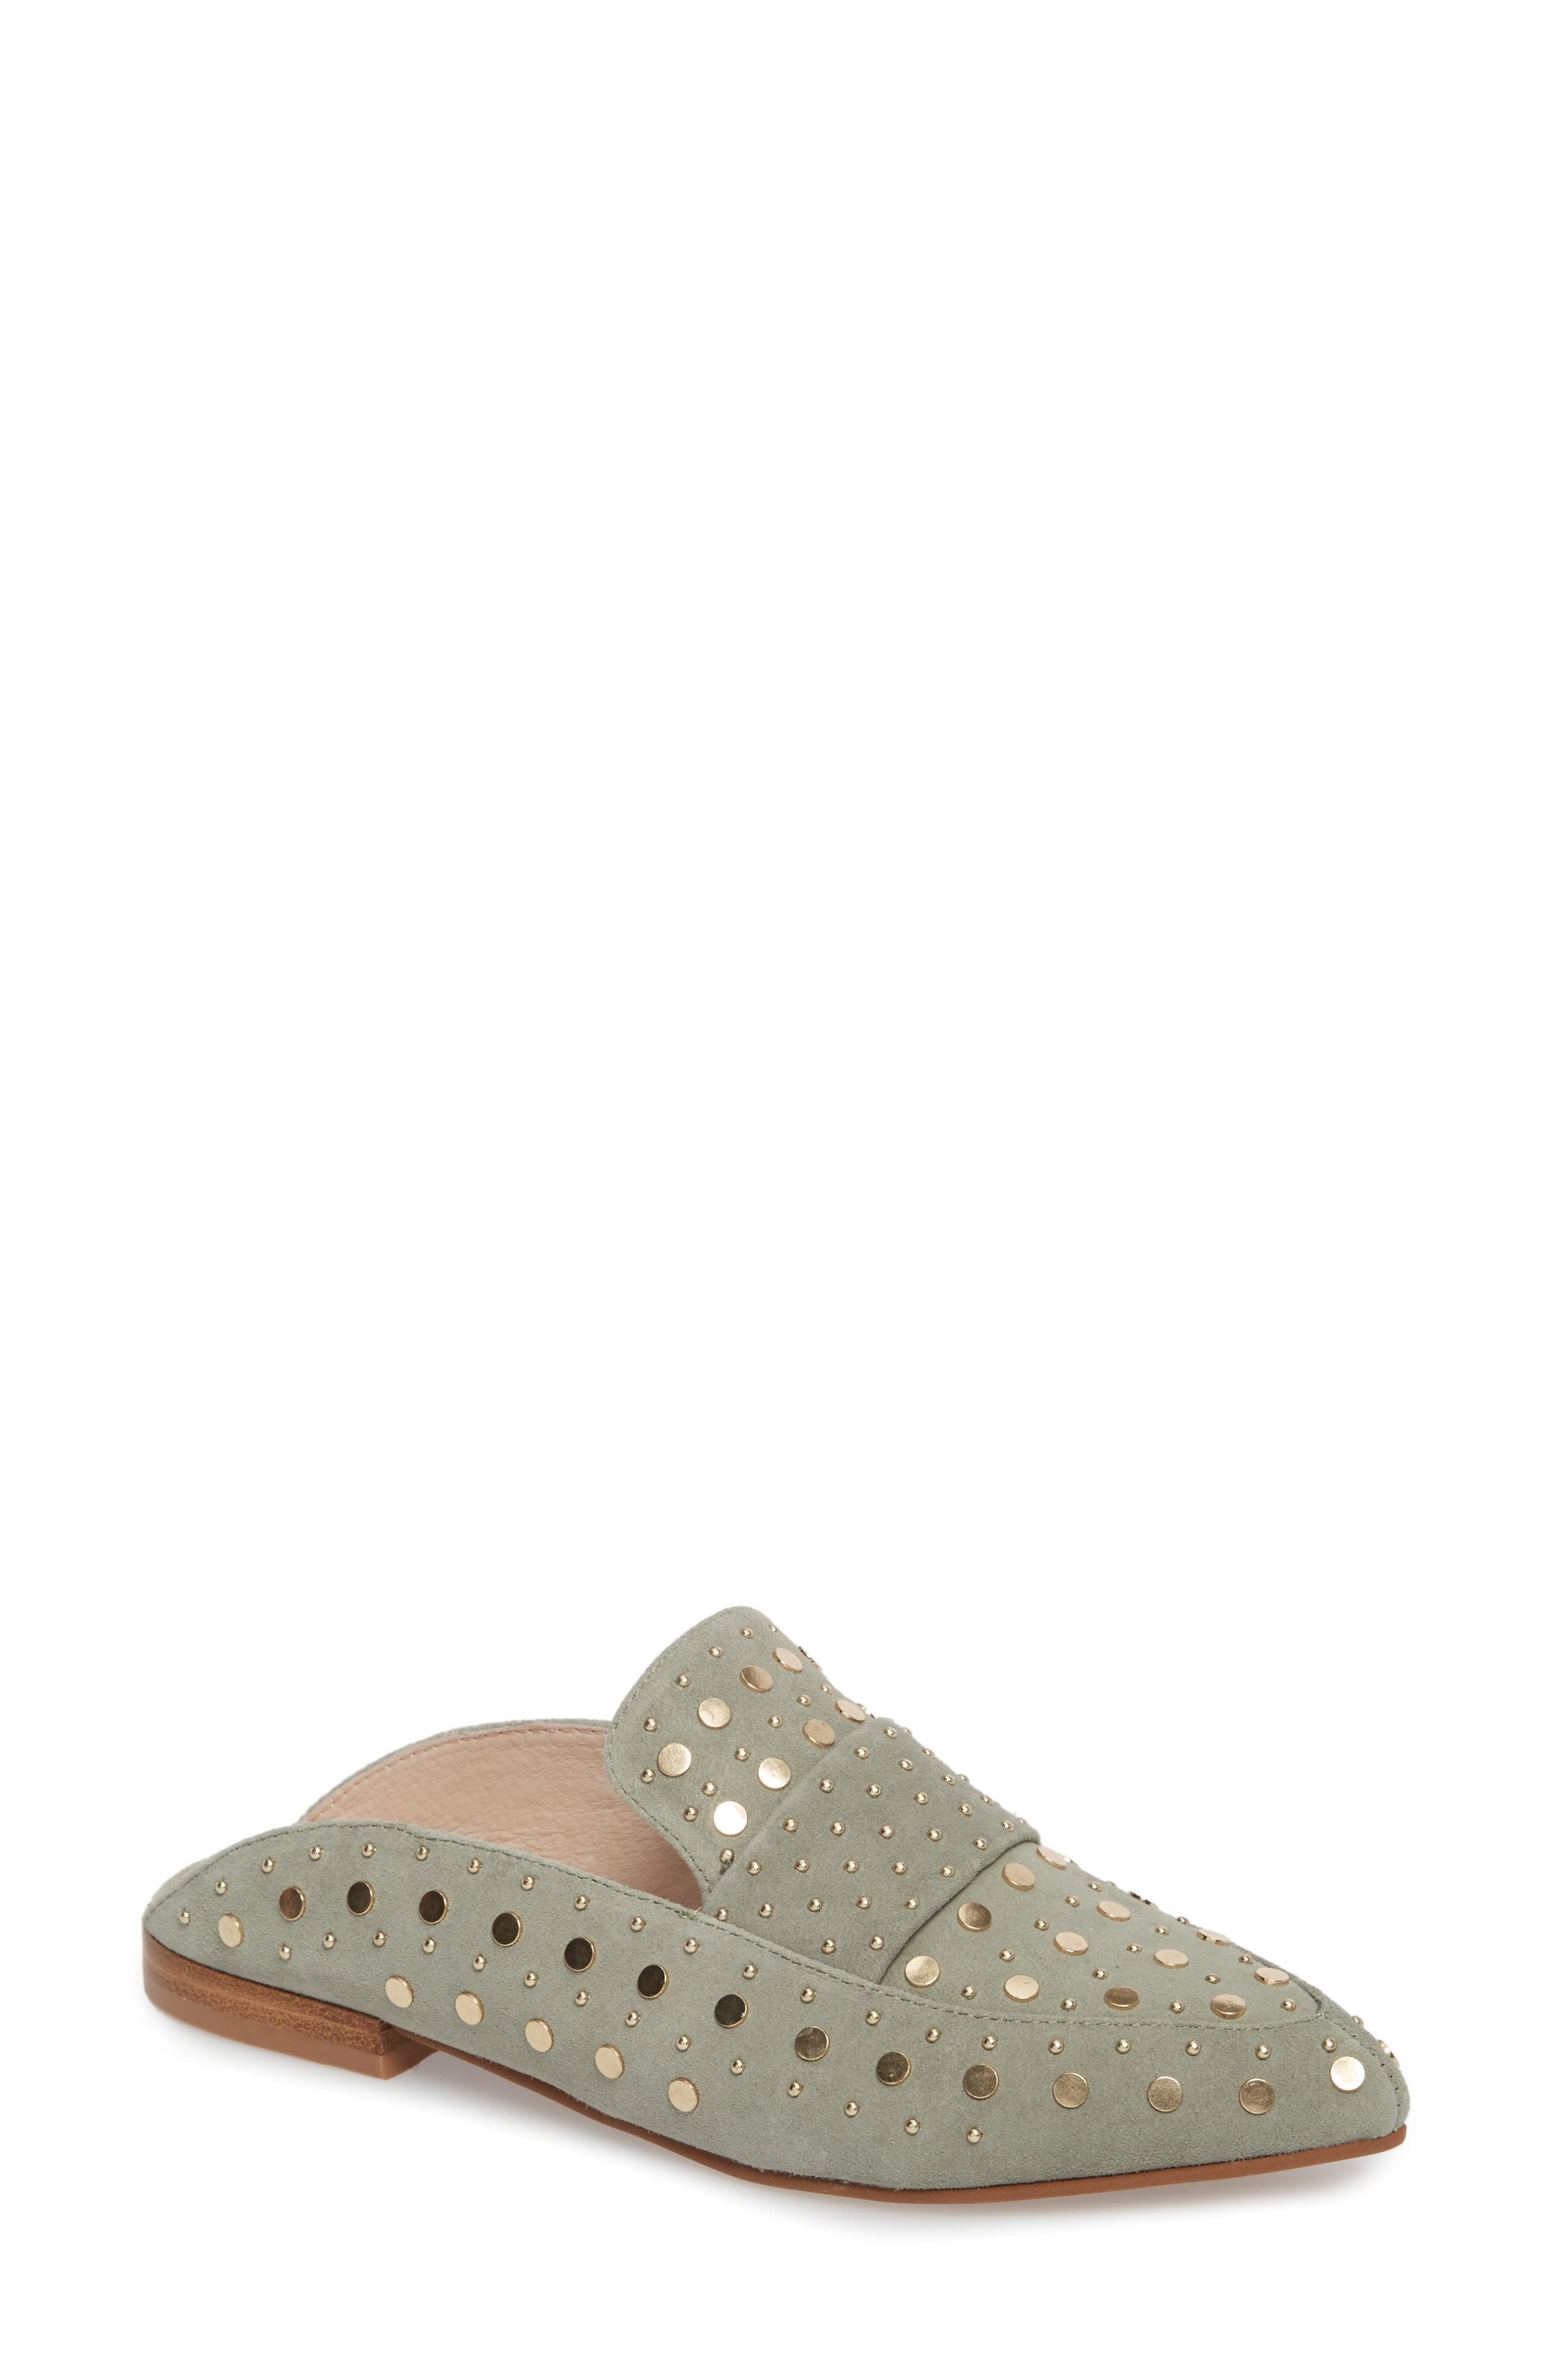 studded loafer mules